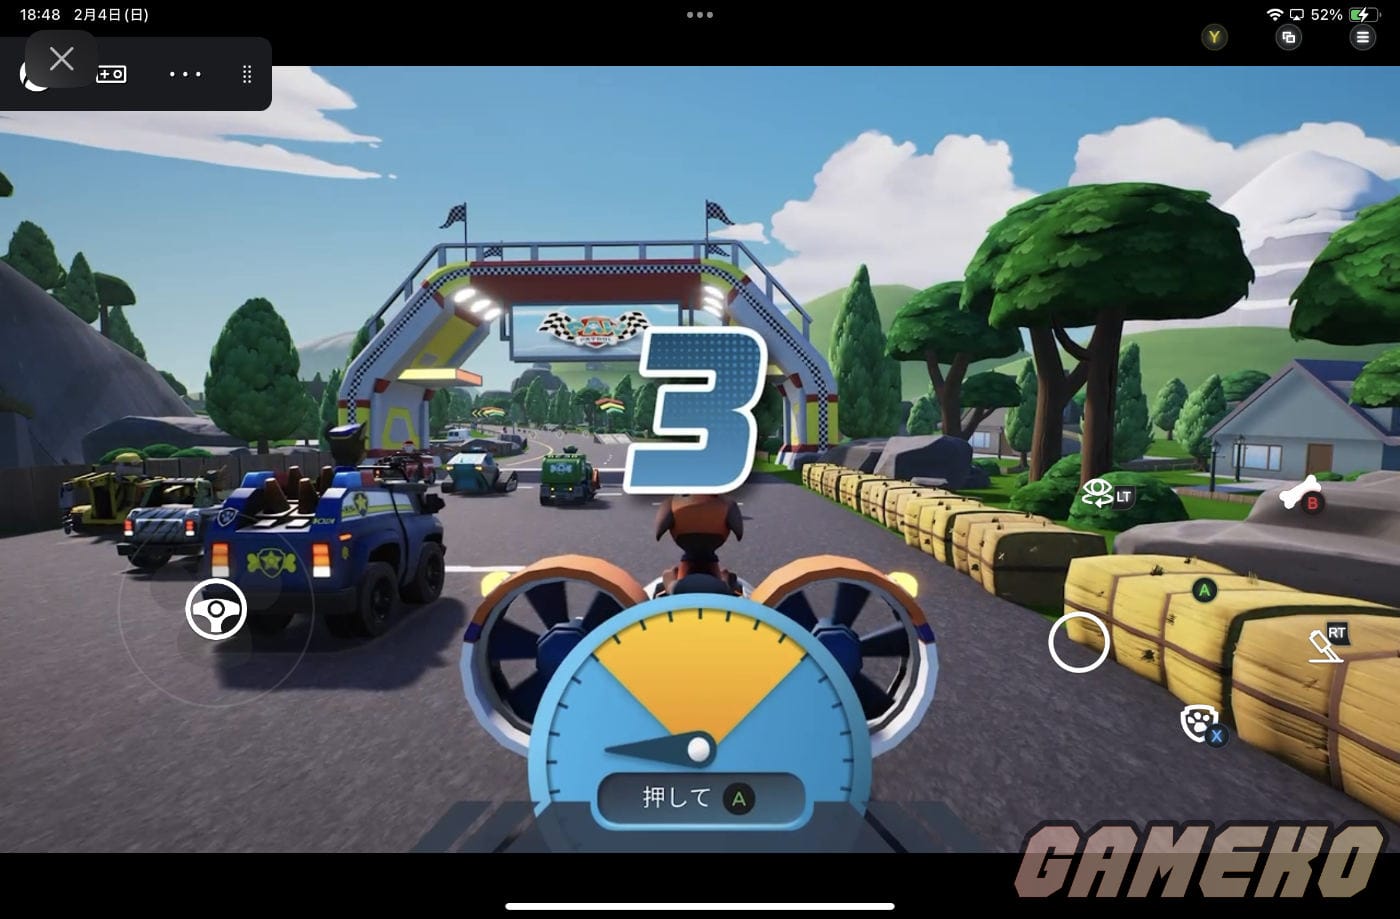 Gamepass cloudgaming ipad only 2